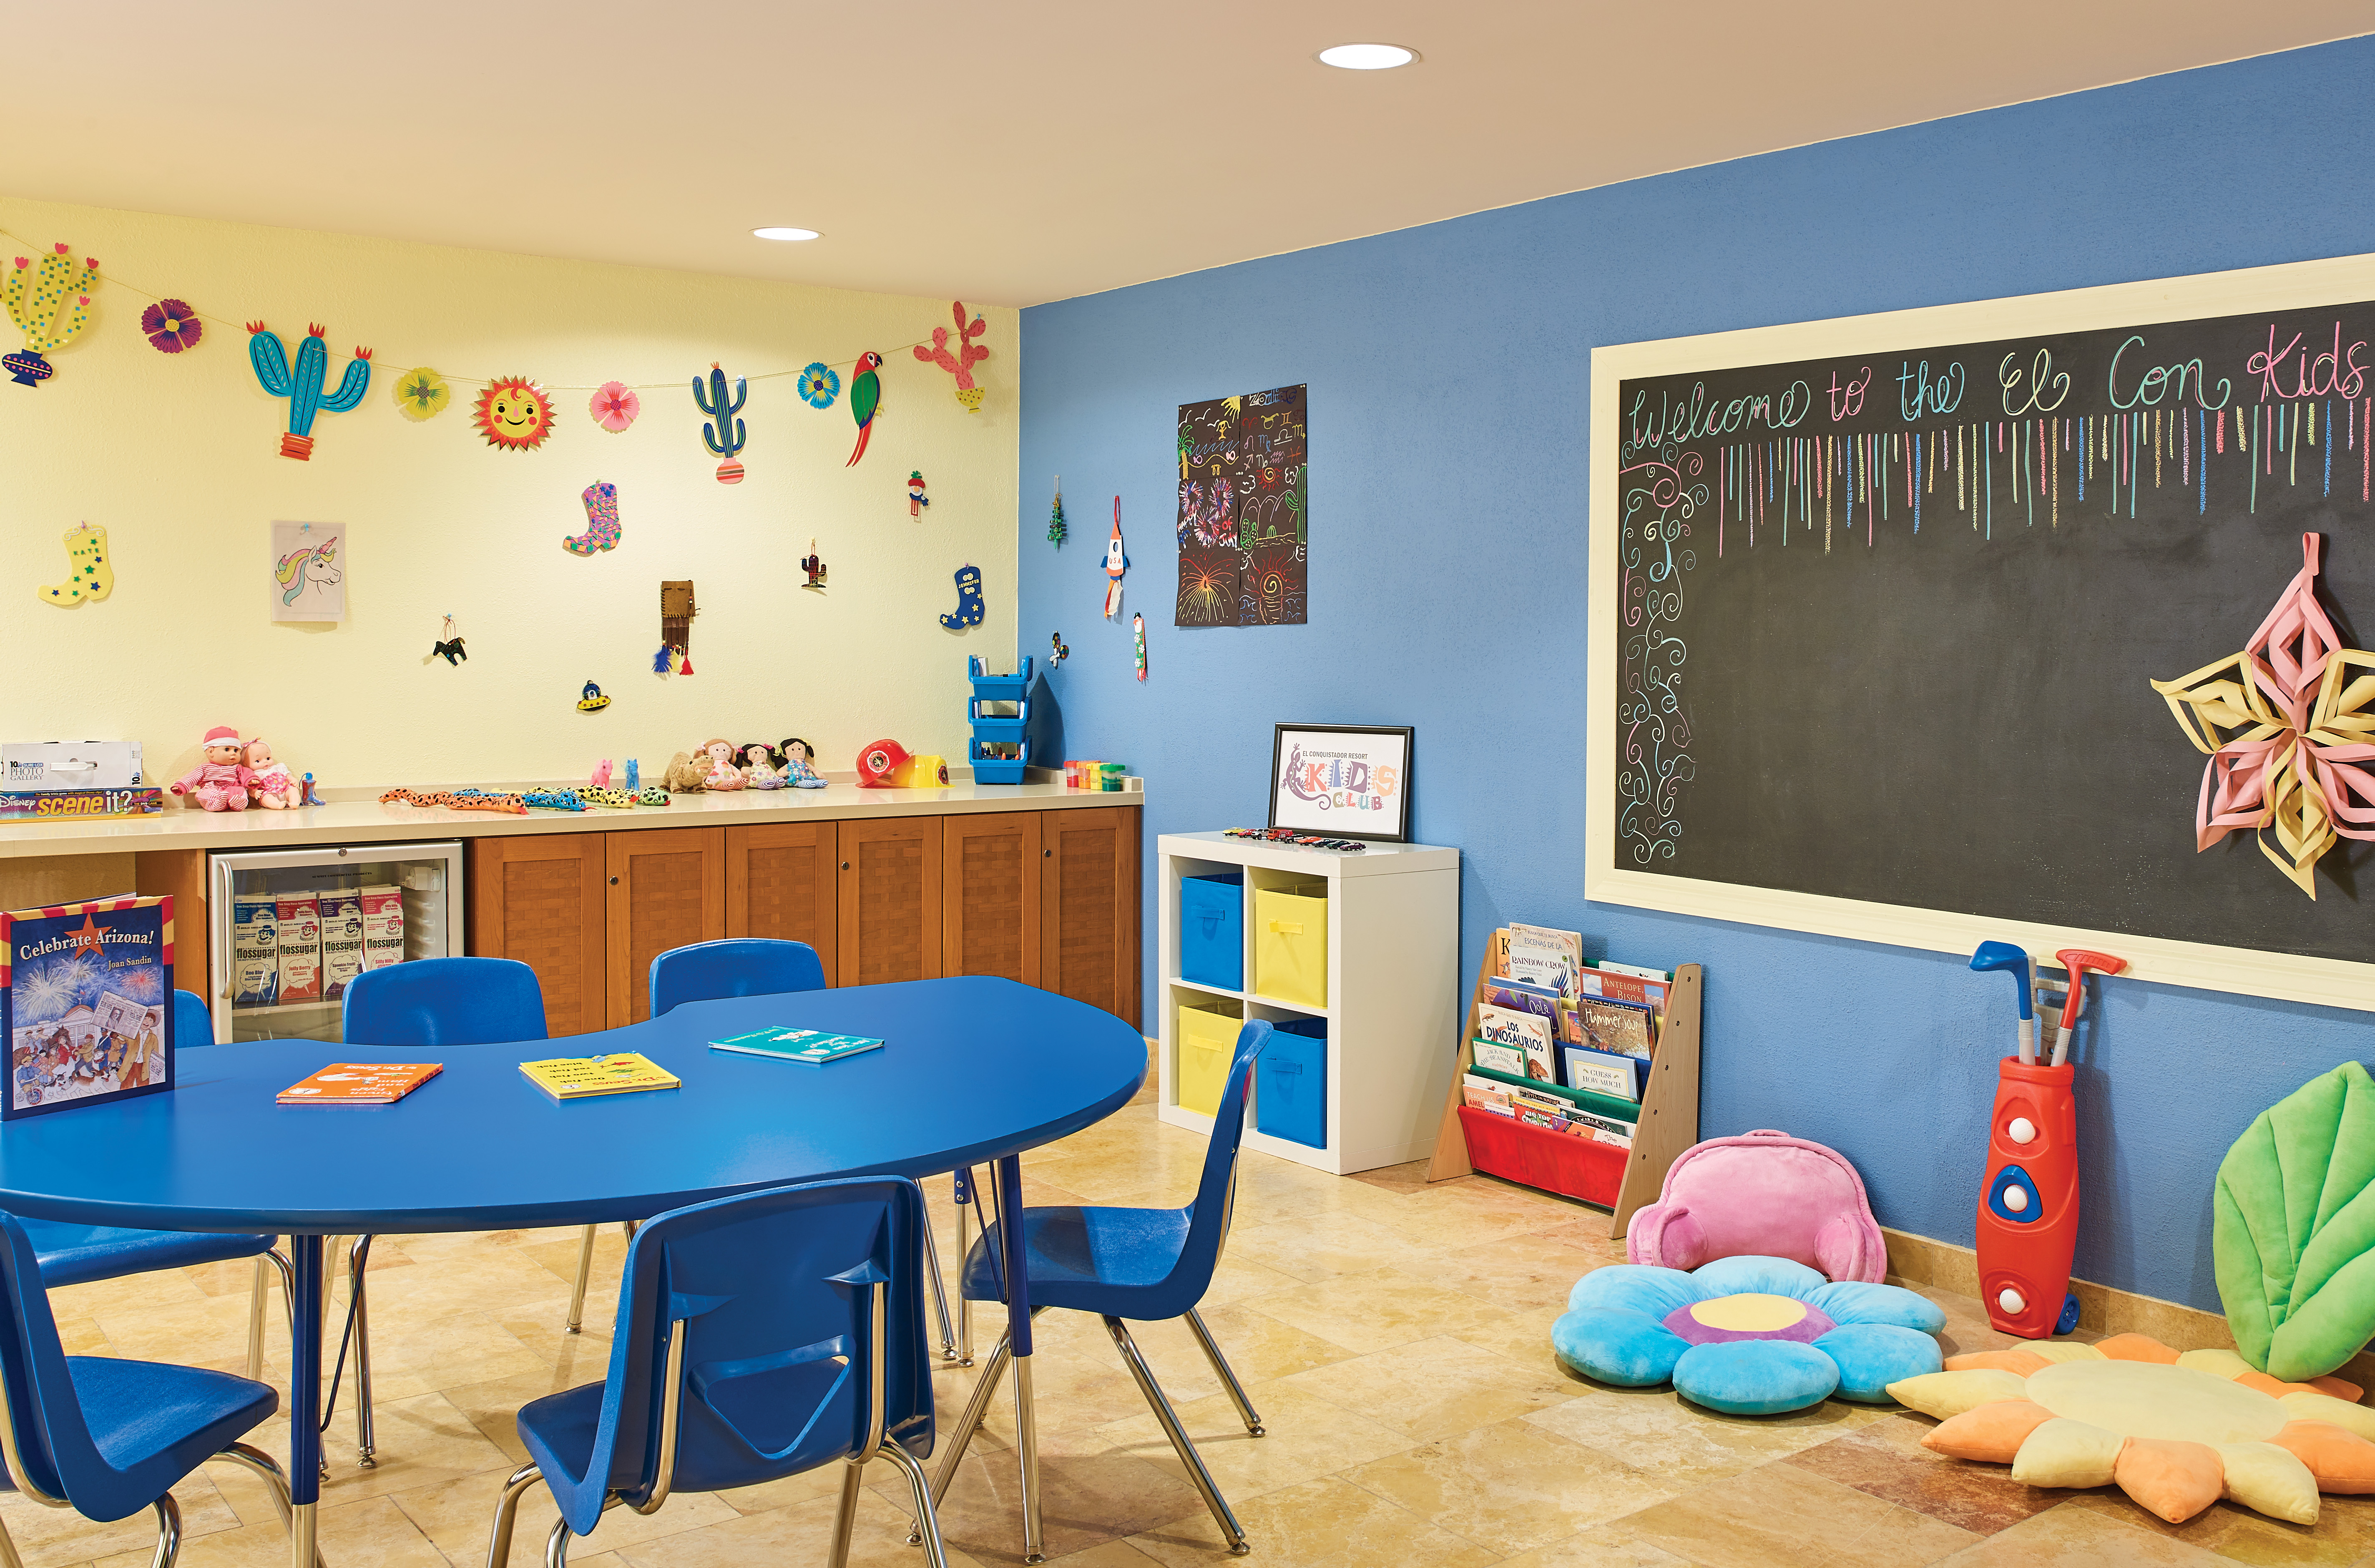 Kids Club Area With Chalkboard, Blue Teaching Table with Chairs, Cubbies, and Bookshelf